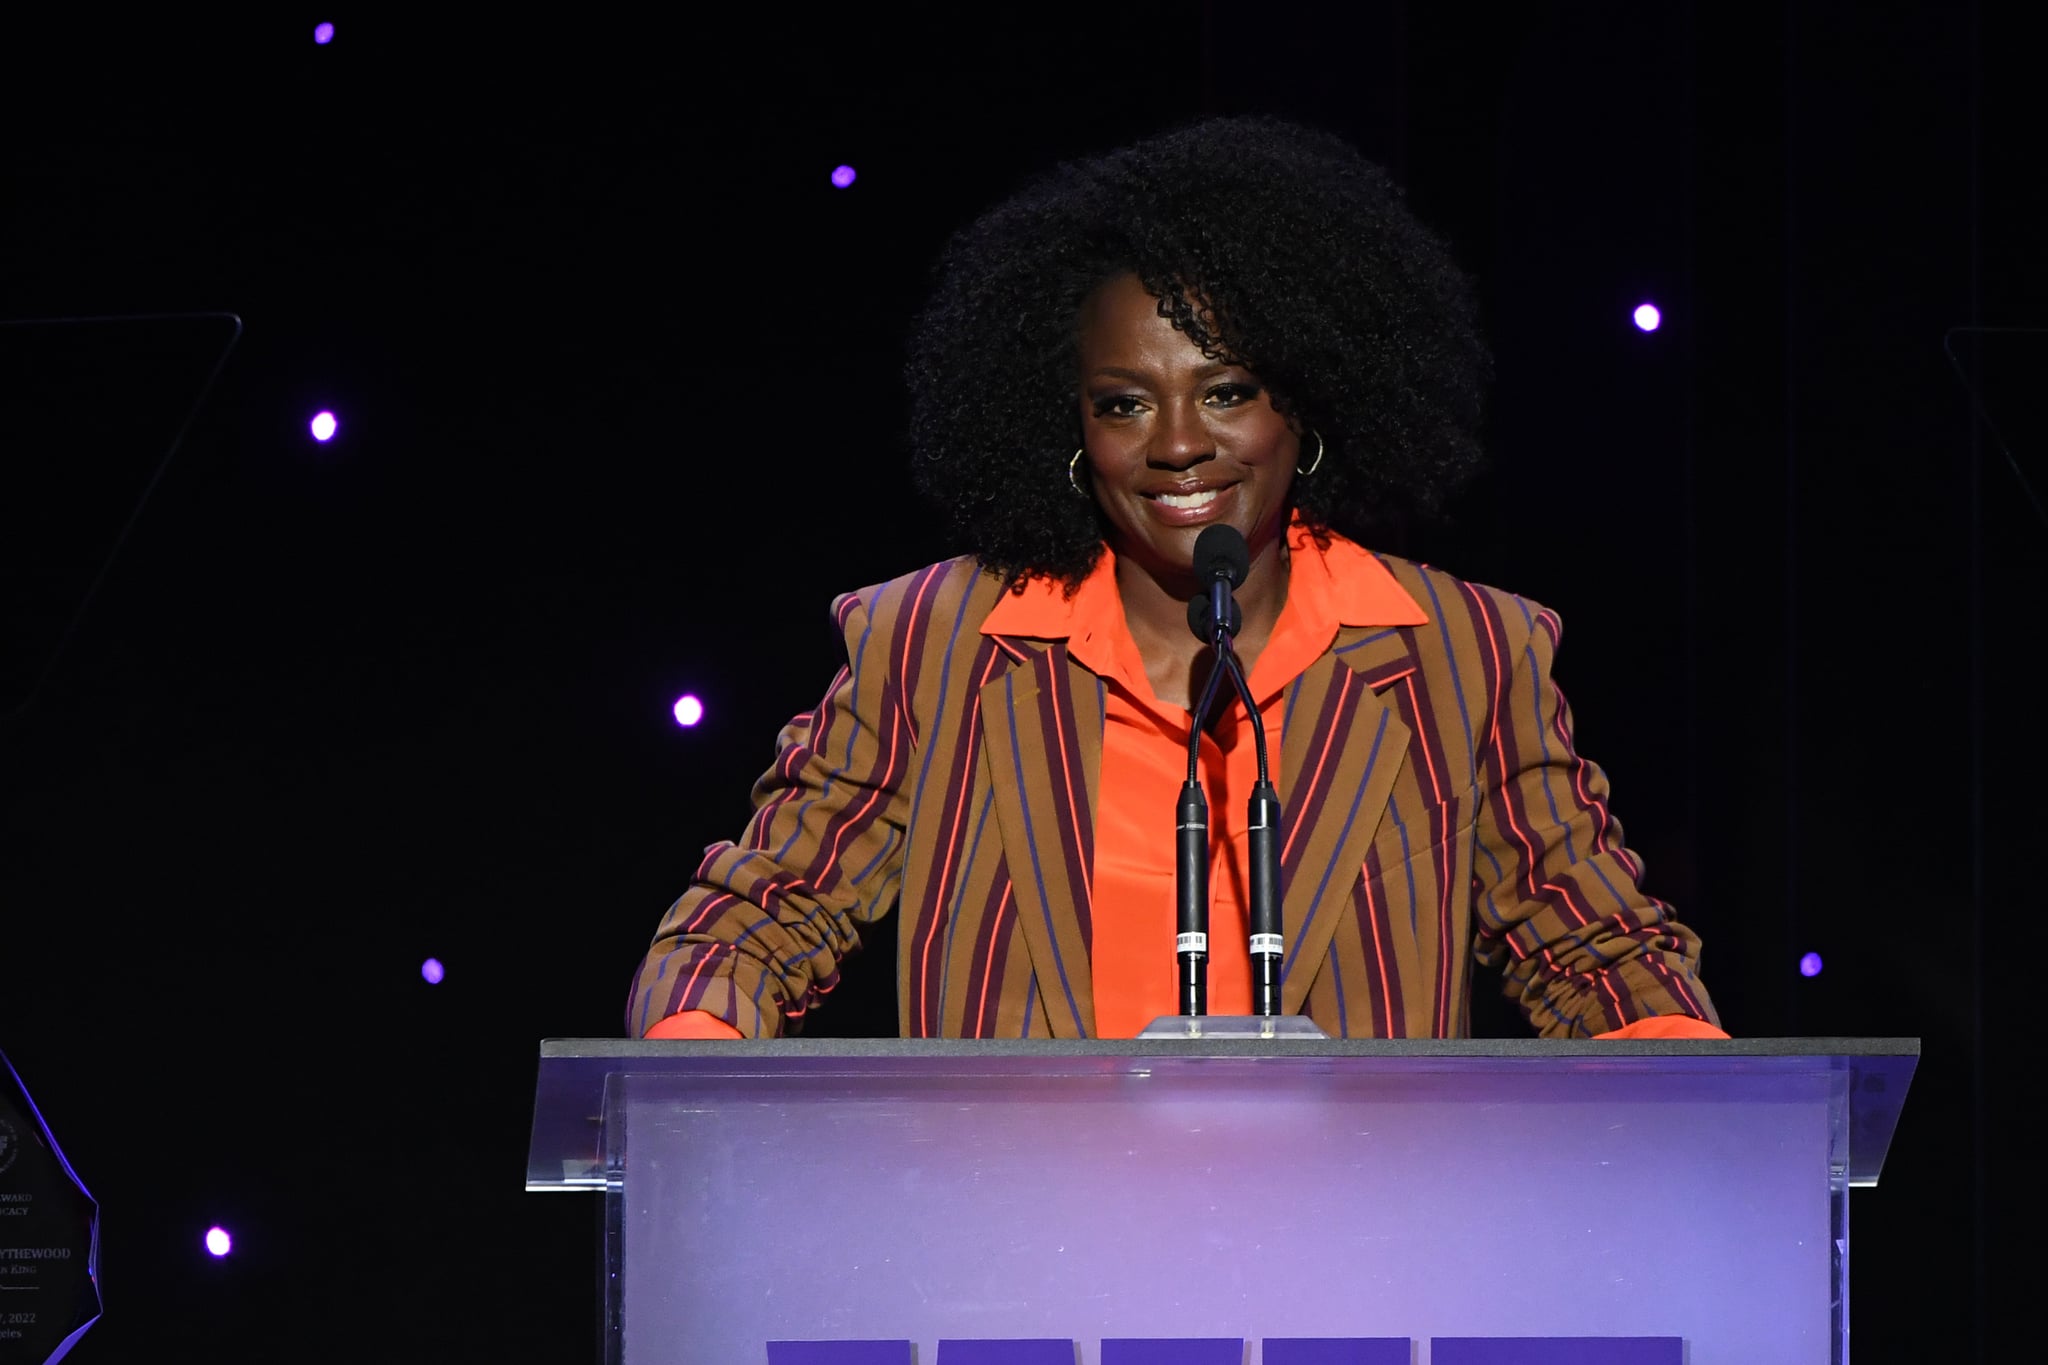 BEVERLY HILLS, CALIFORNIA - OCTOBER 27: Viola Davis speaks onstage during 2022 WIF Honors at The Beverly Hilton on October 27, 2022 in Beverly Hills, California. (Photo by JC Olivera/Getty Images)